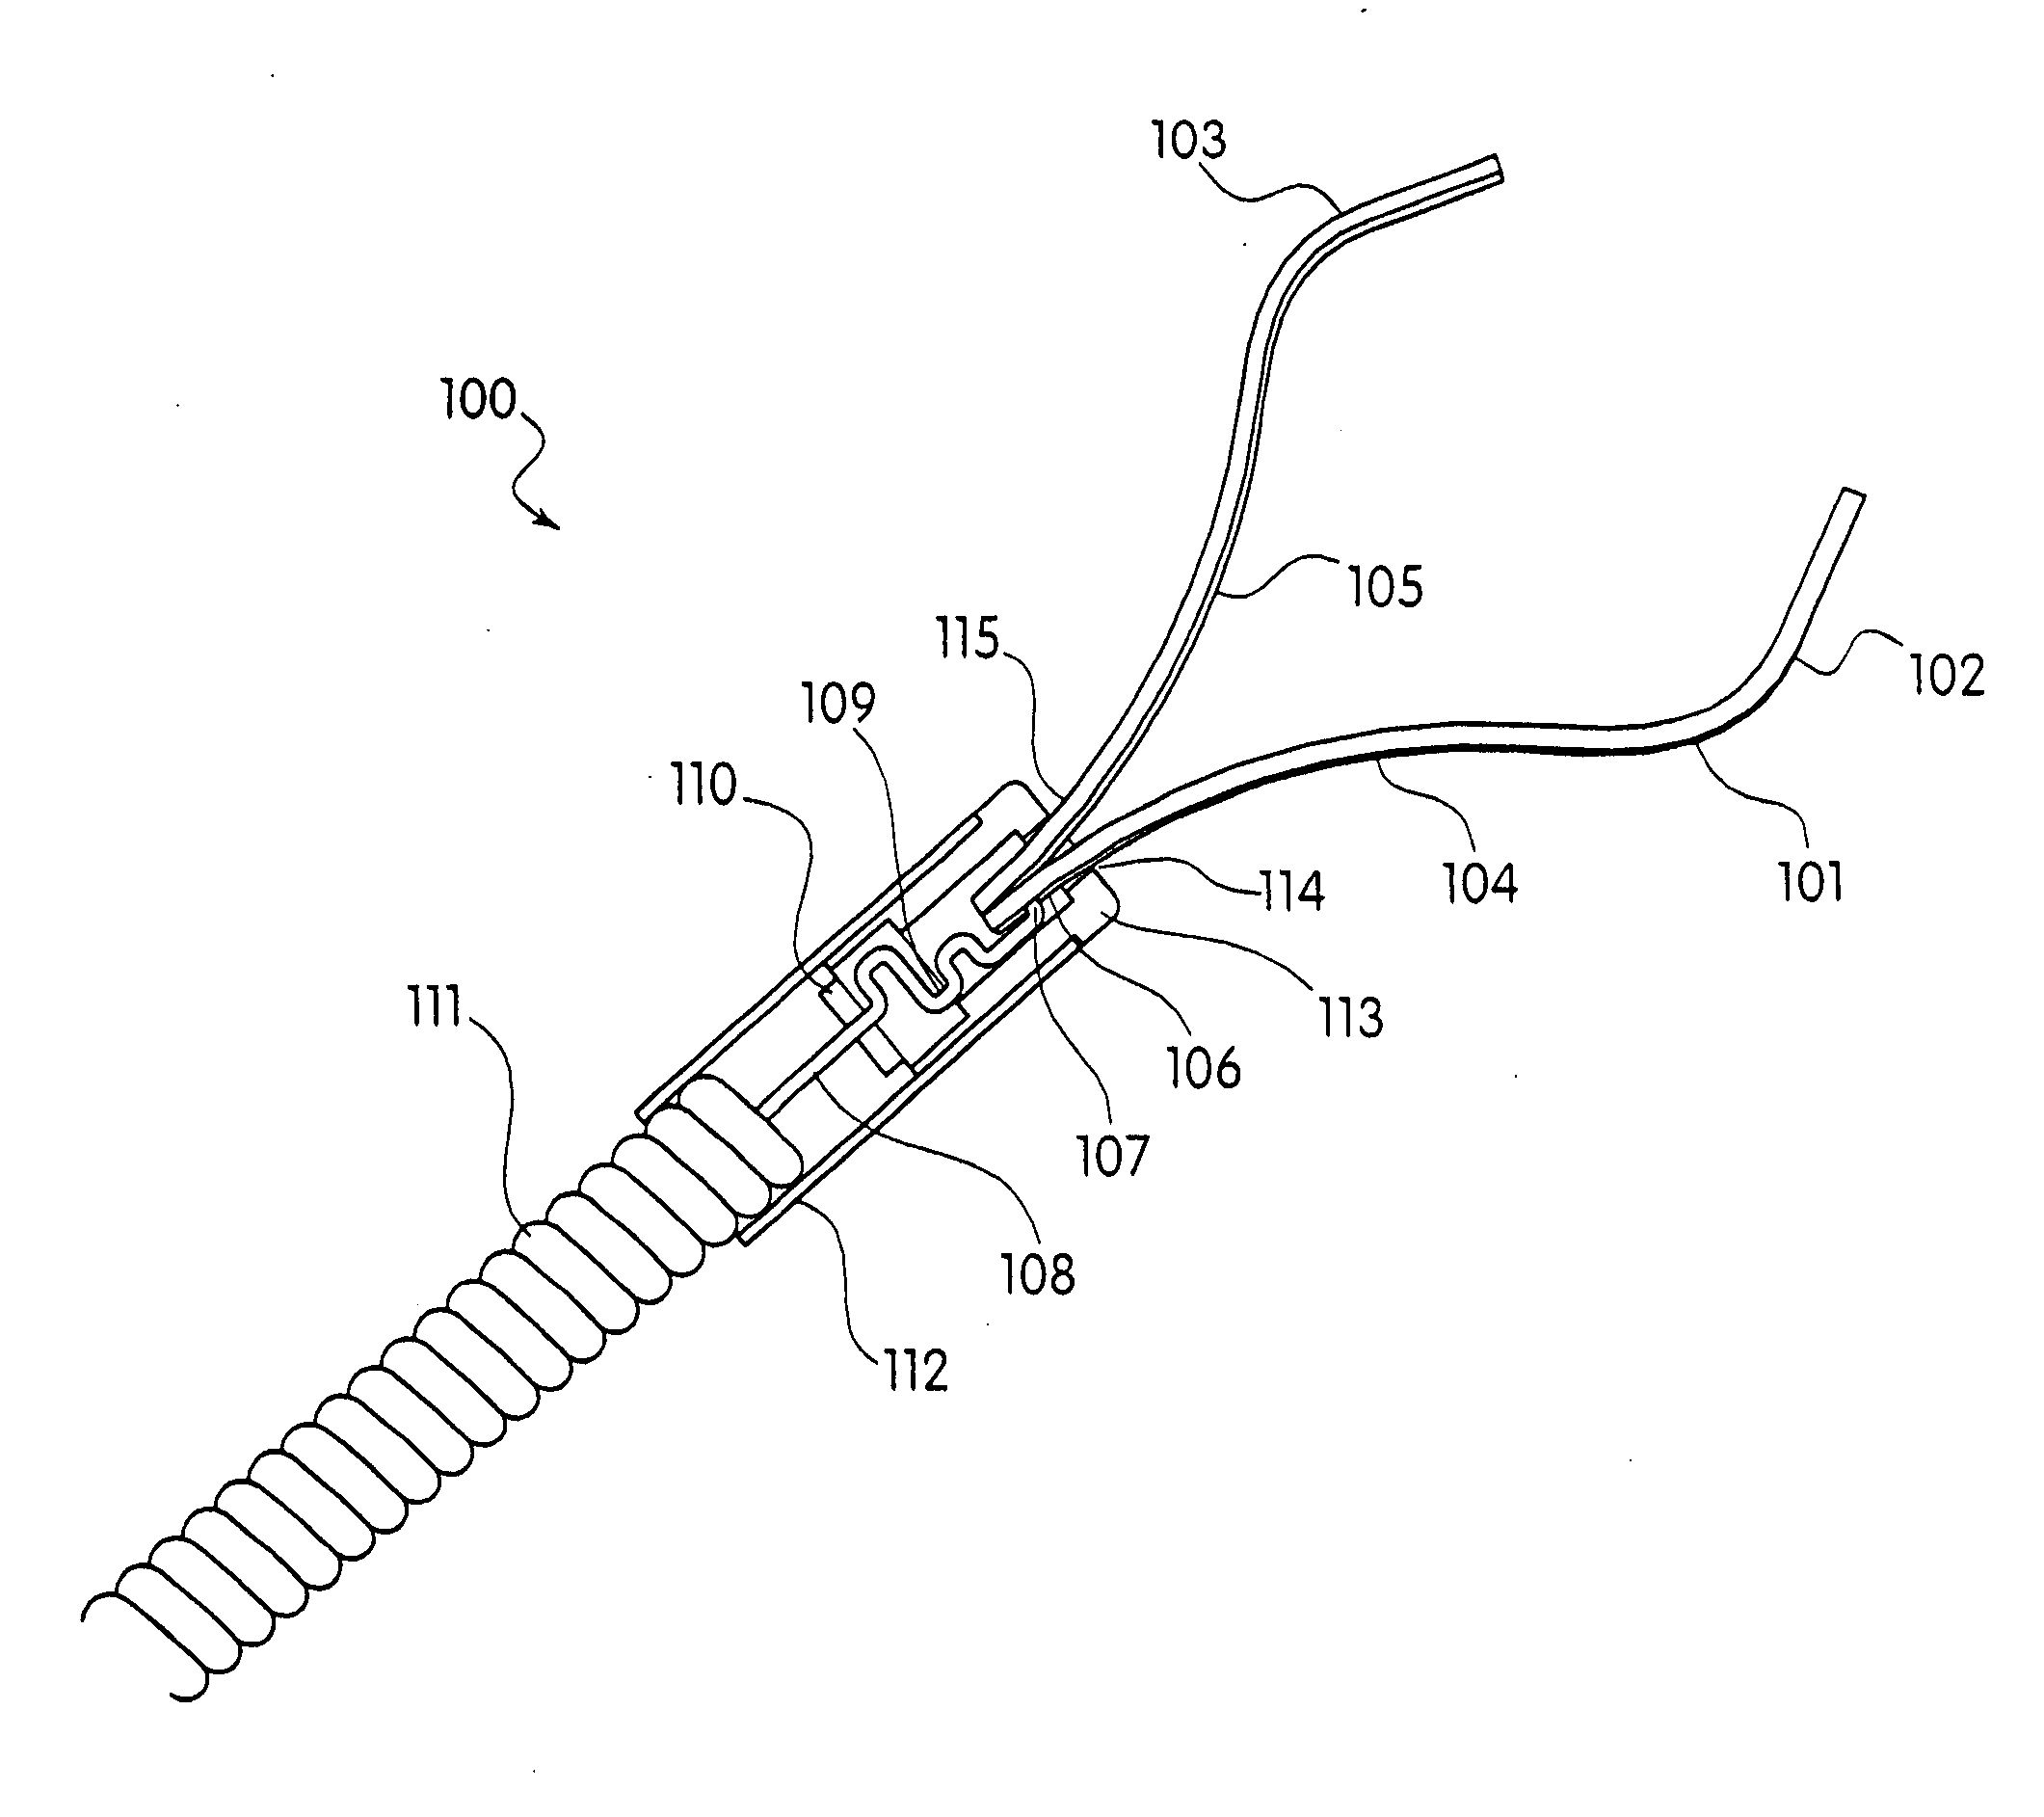 Device and method for through the scope endoscopic hemostatic clipping